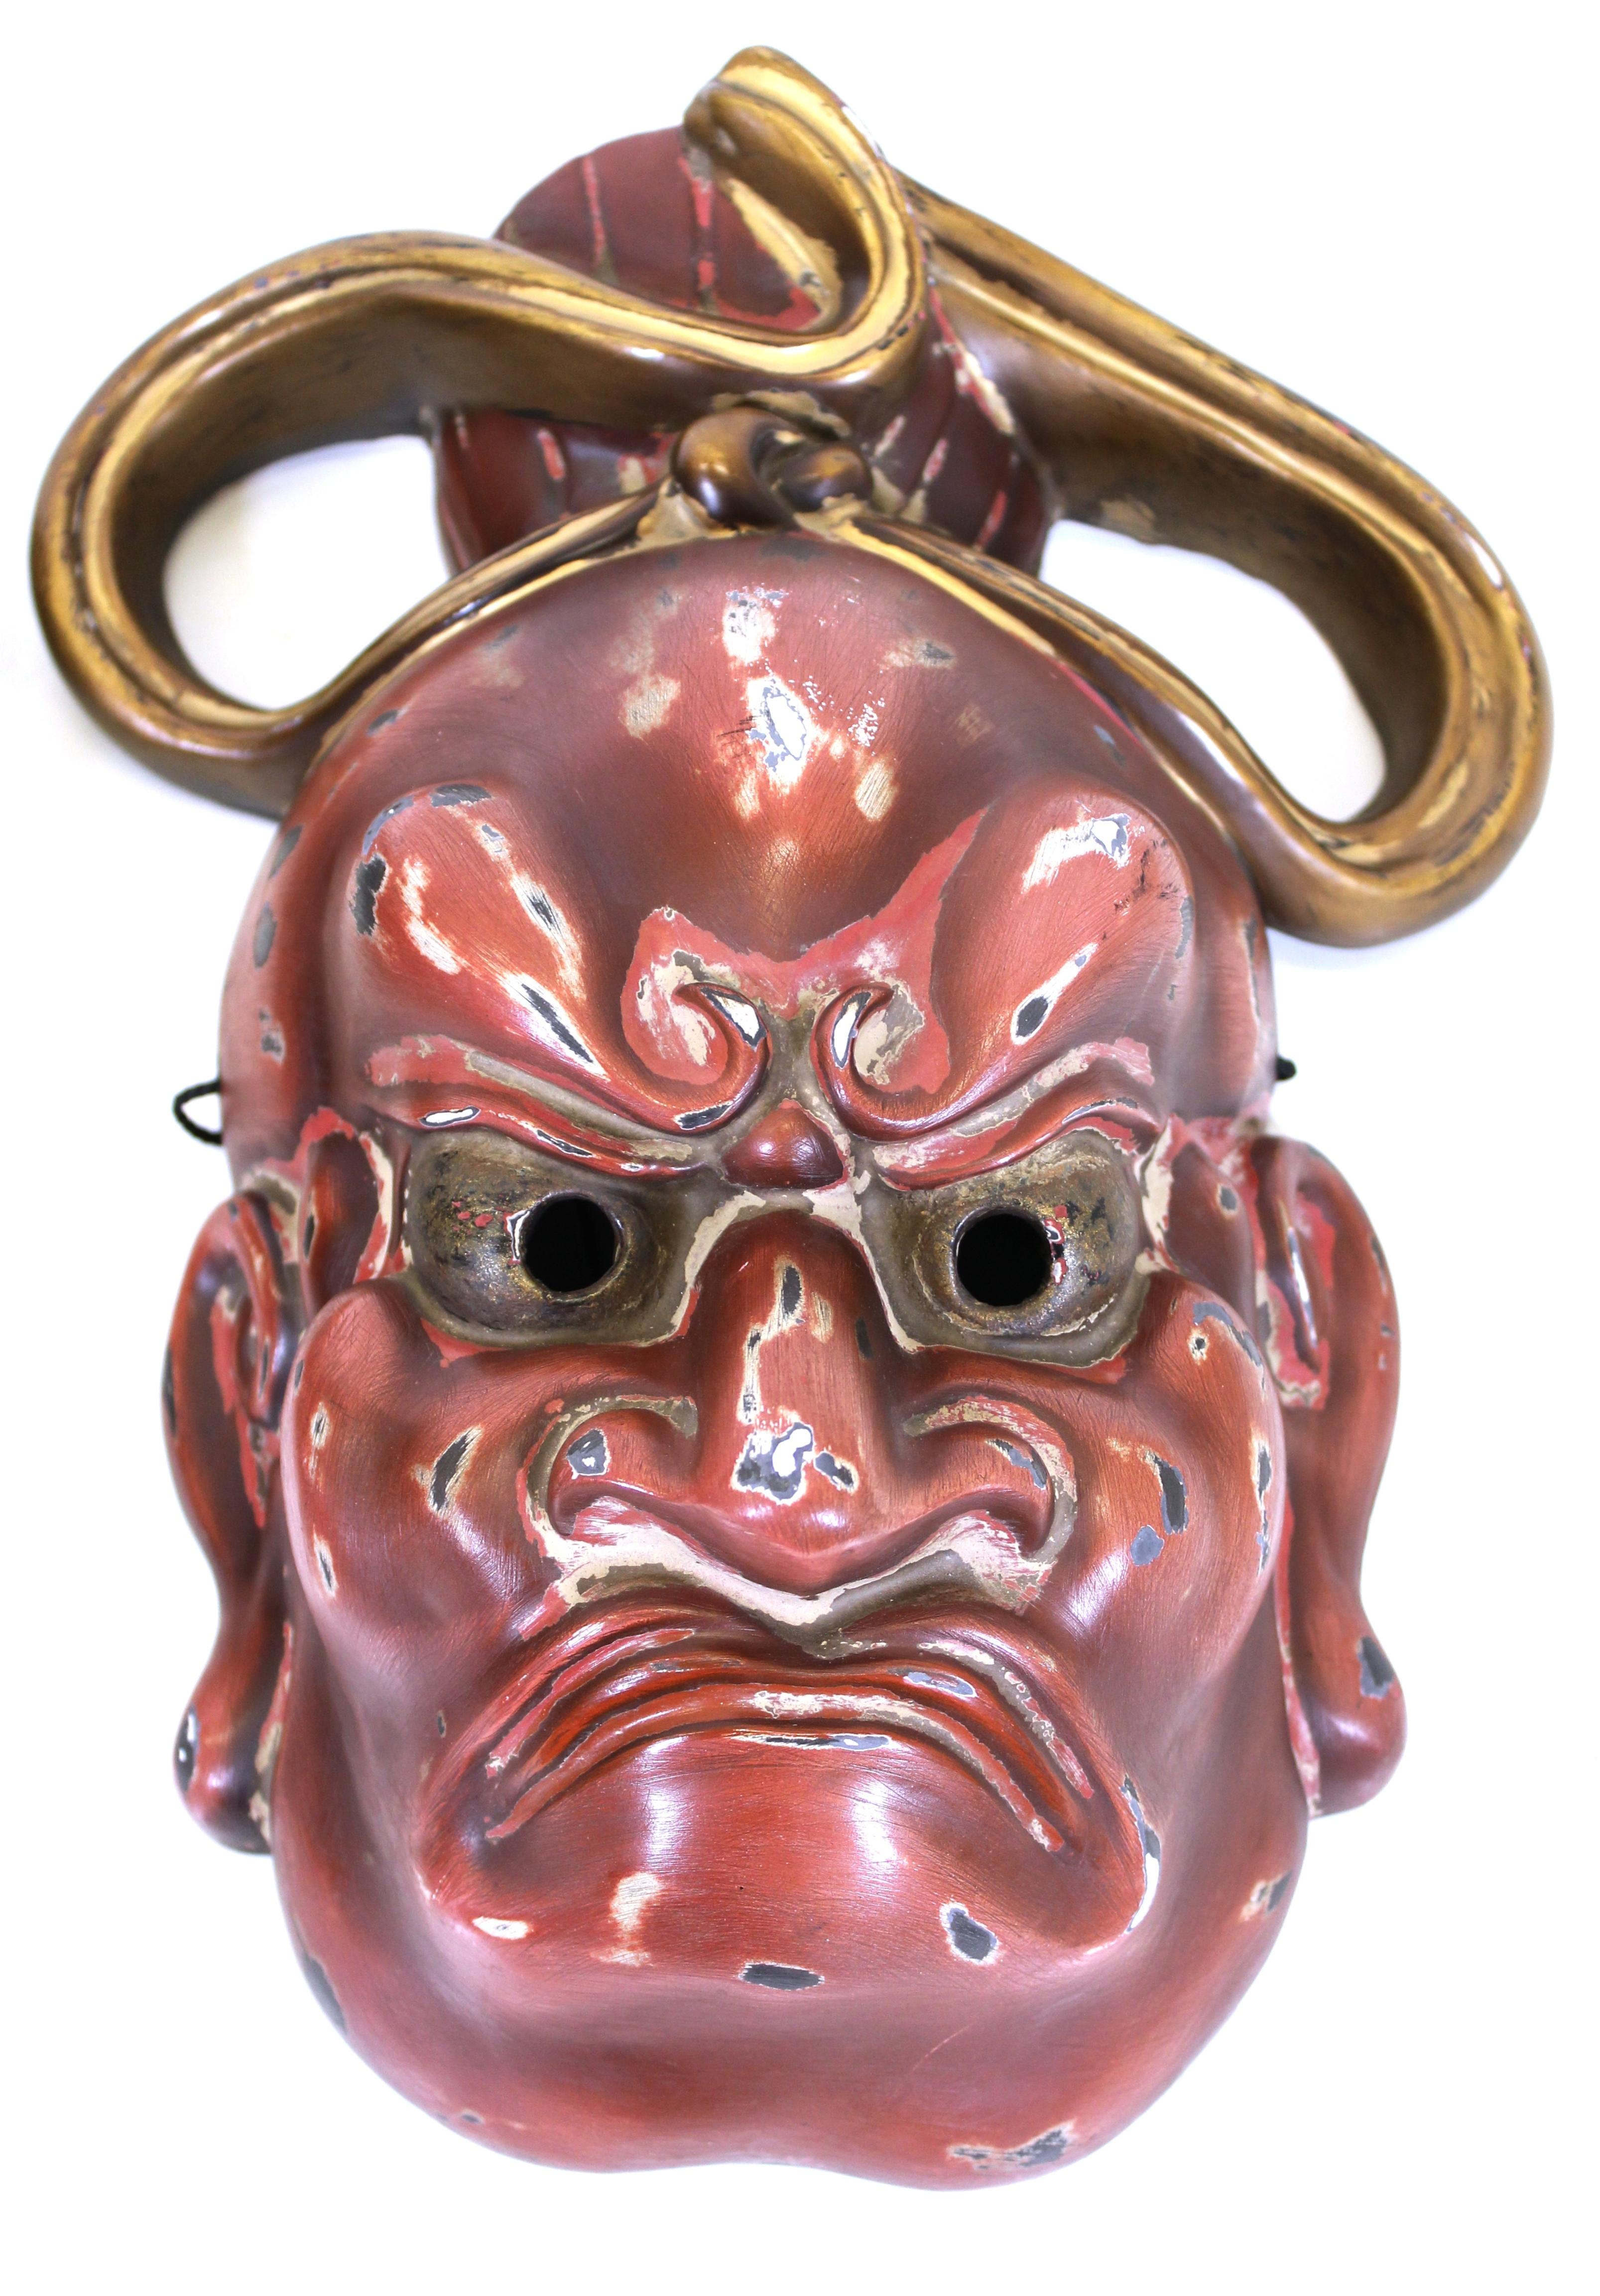 Japanese pair of Nio Buddhist temple guardian masks in finely carved and lacquered cypress wood, with signed labels on the inside, early 20th century, circa 1920. 
A pair of protectors, one on either side of the entrance to the temple, the Nio are